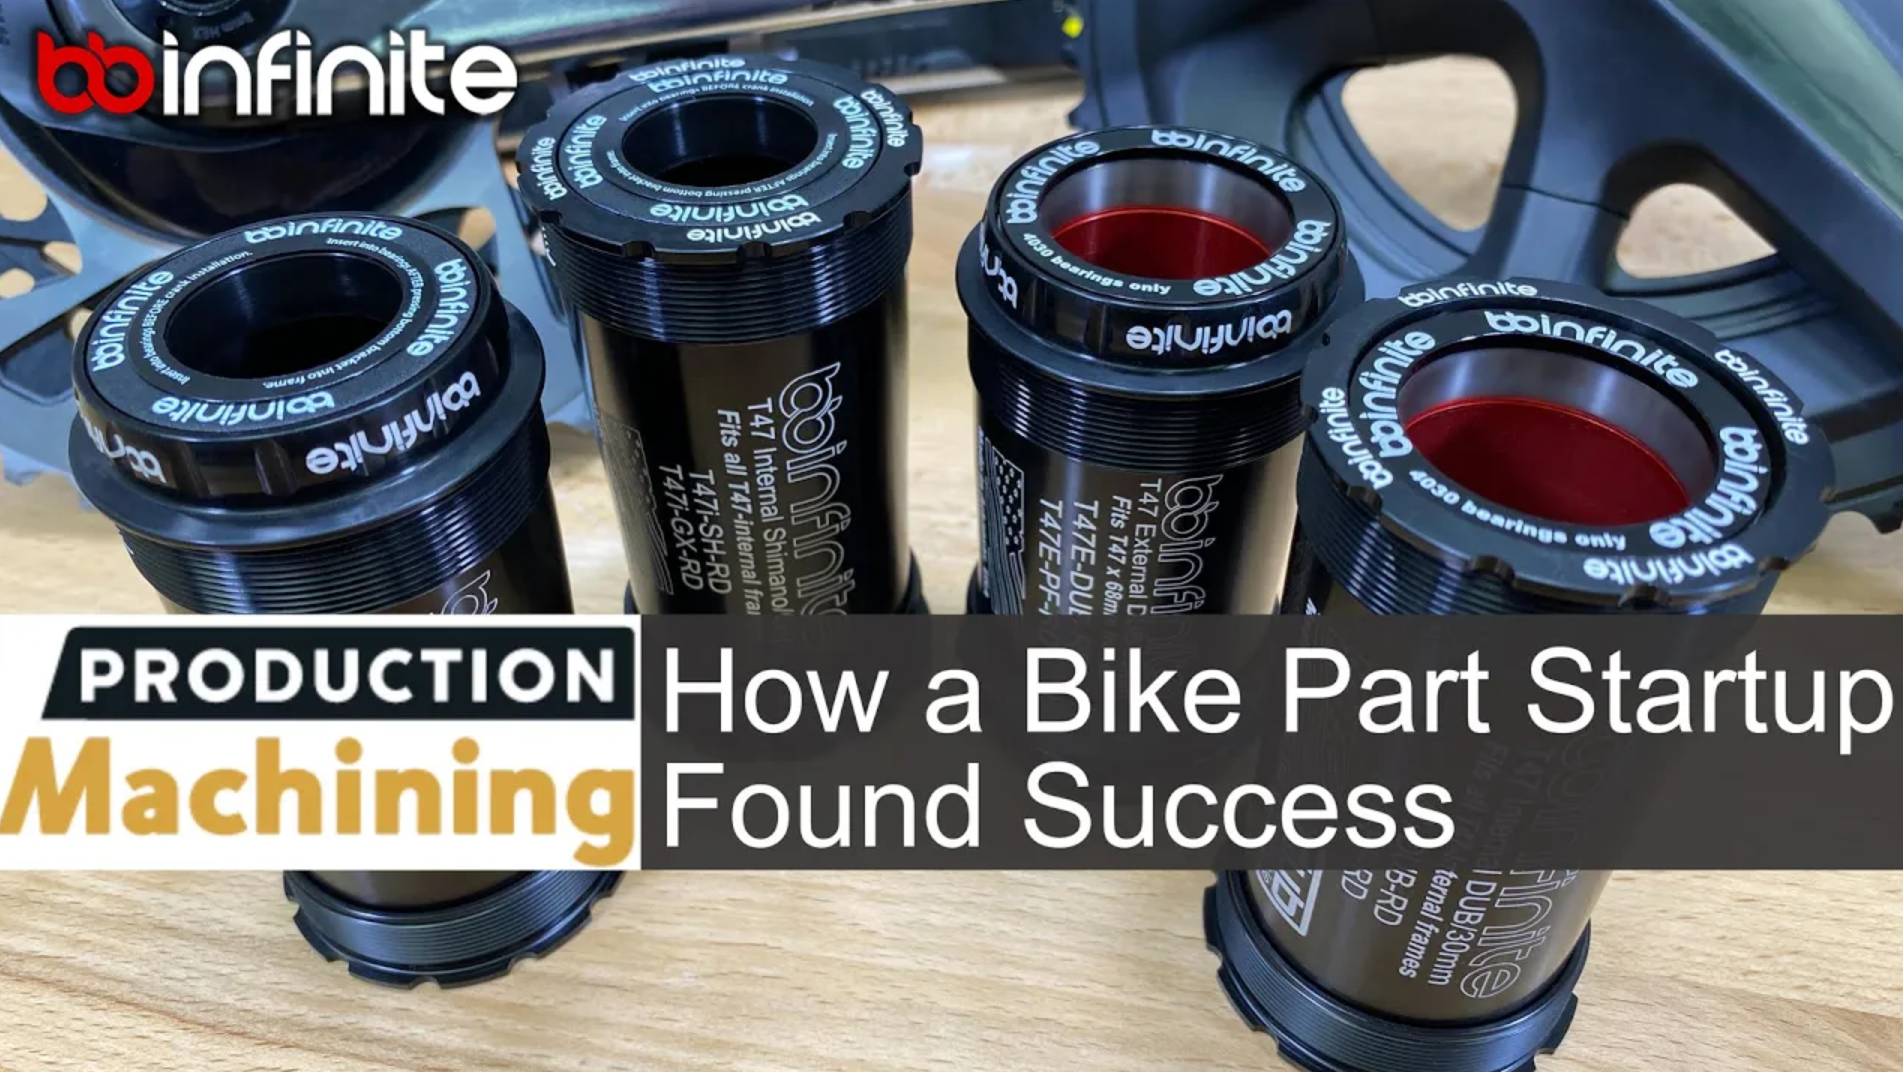 BBInfinite: How a Bicycle Part Start-up Found Success